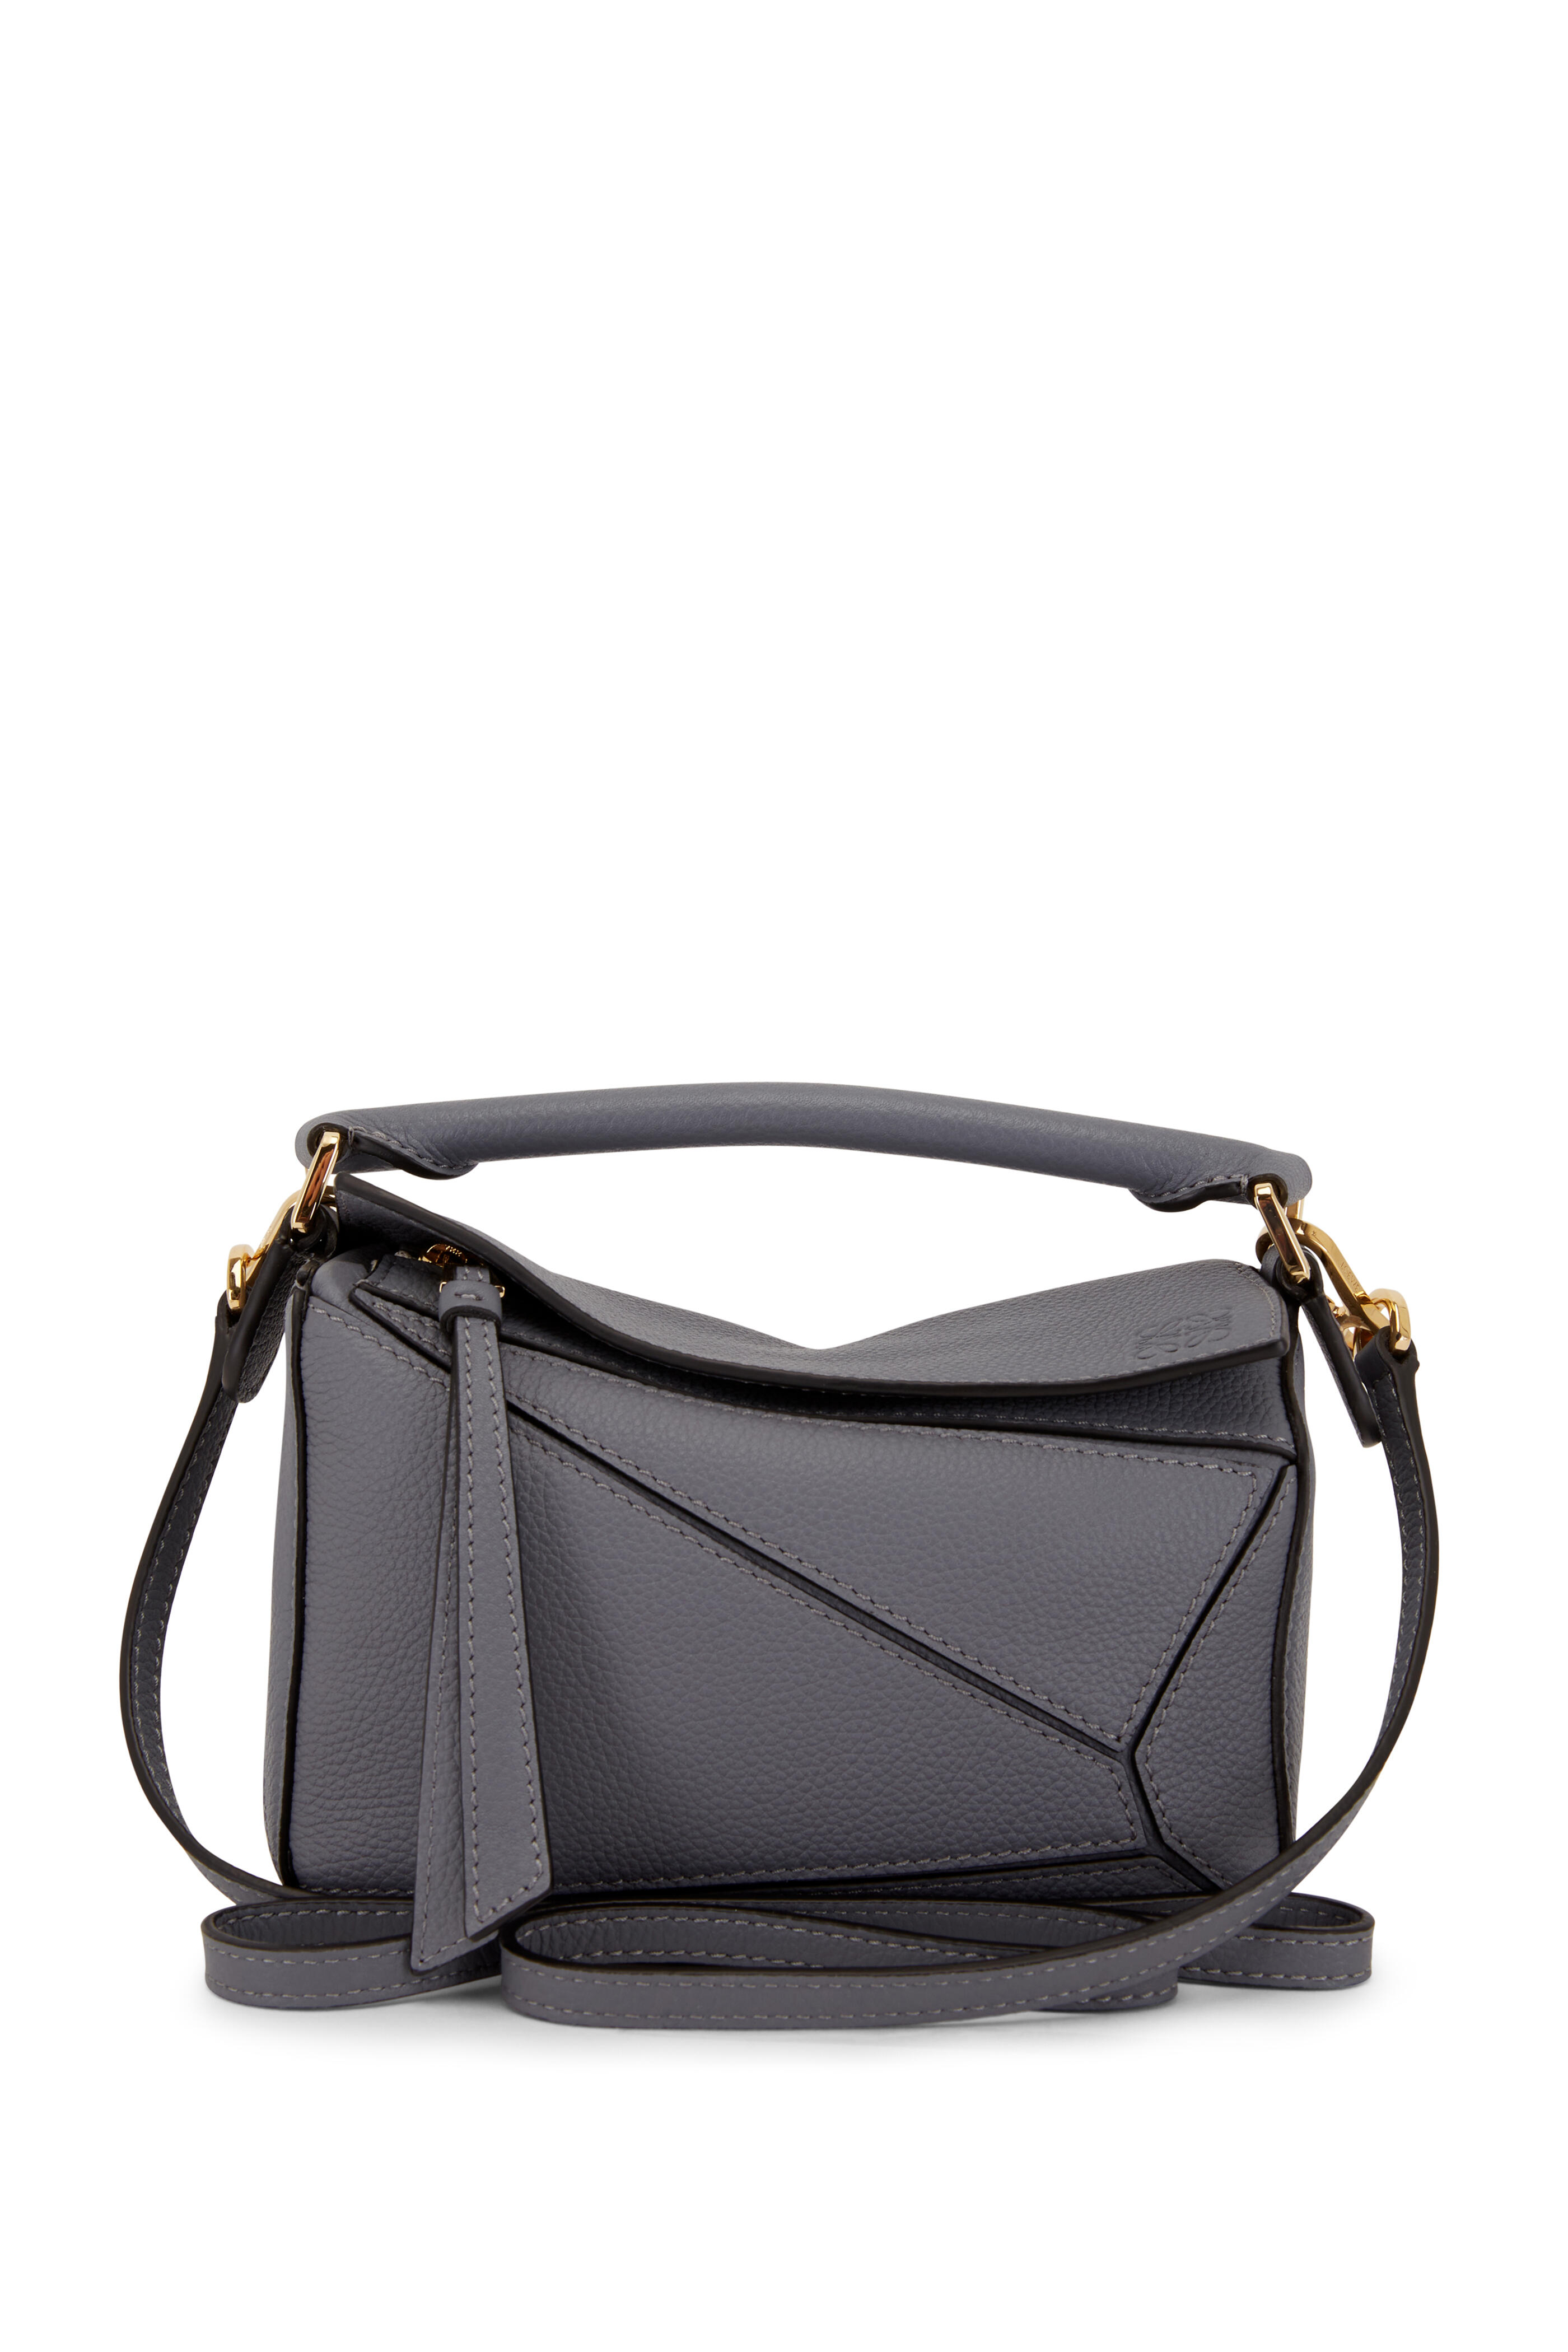 Loewe Small Puzzle Leather Shoulder Bag